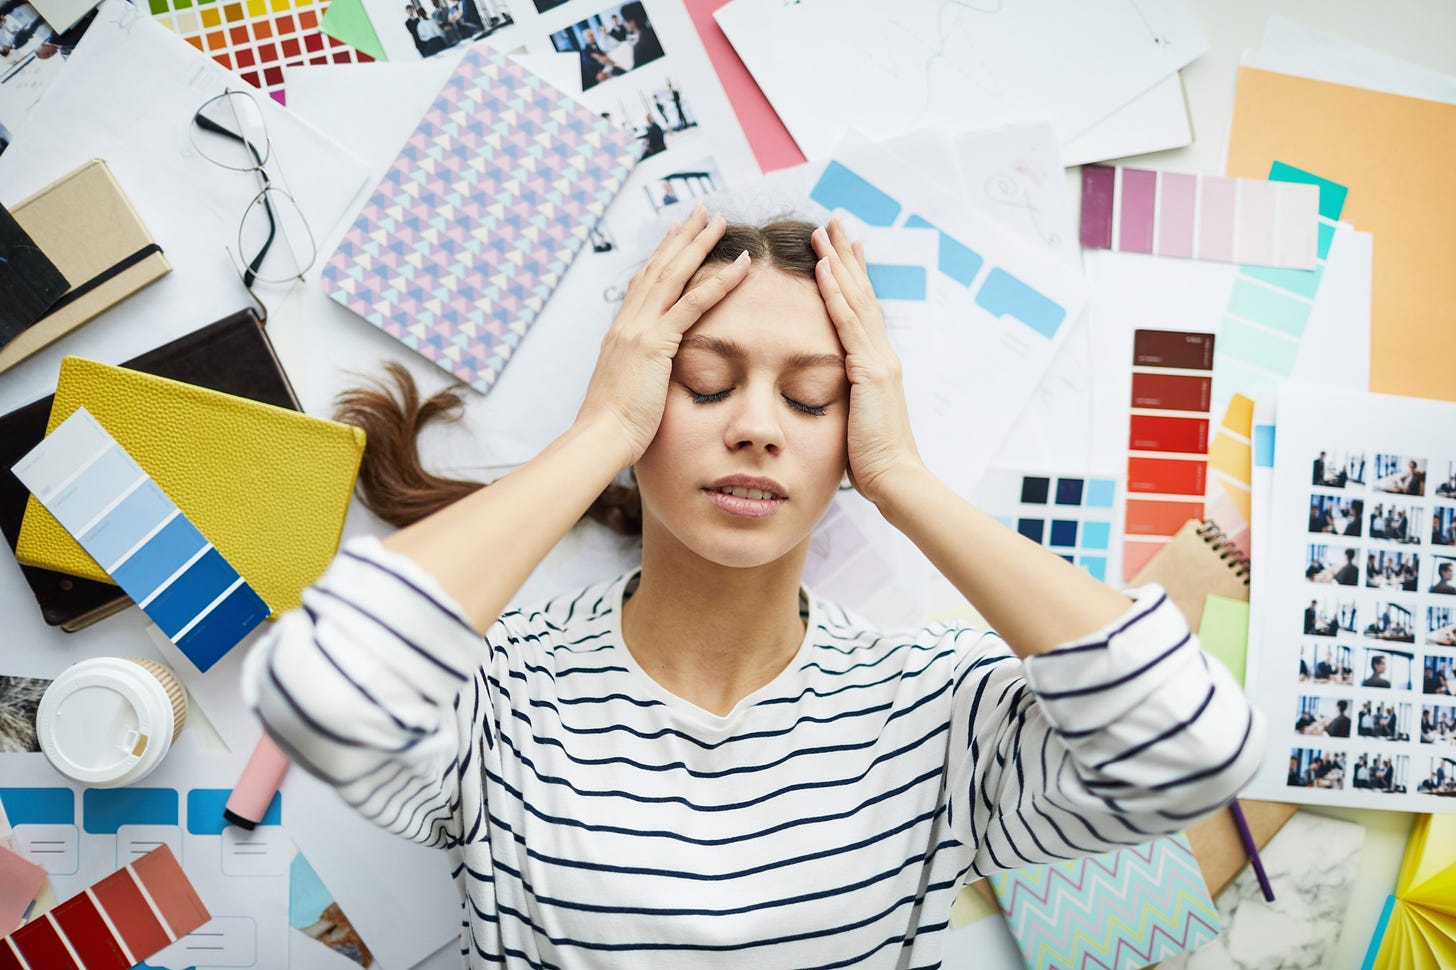 A stressed young woman lays in a pile of clutter with her head in her hands and her eyes closed.